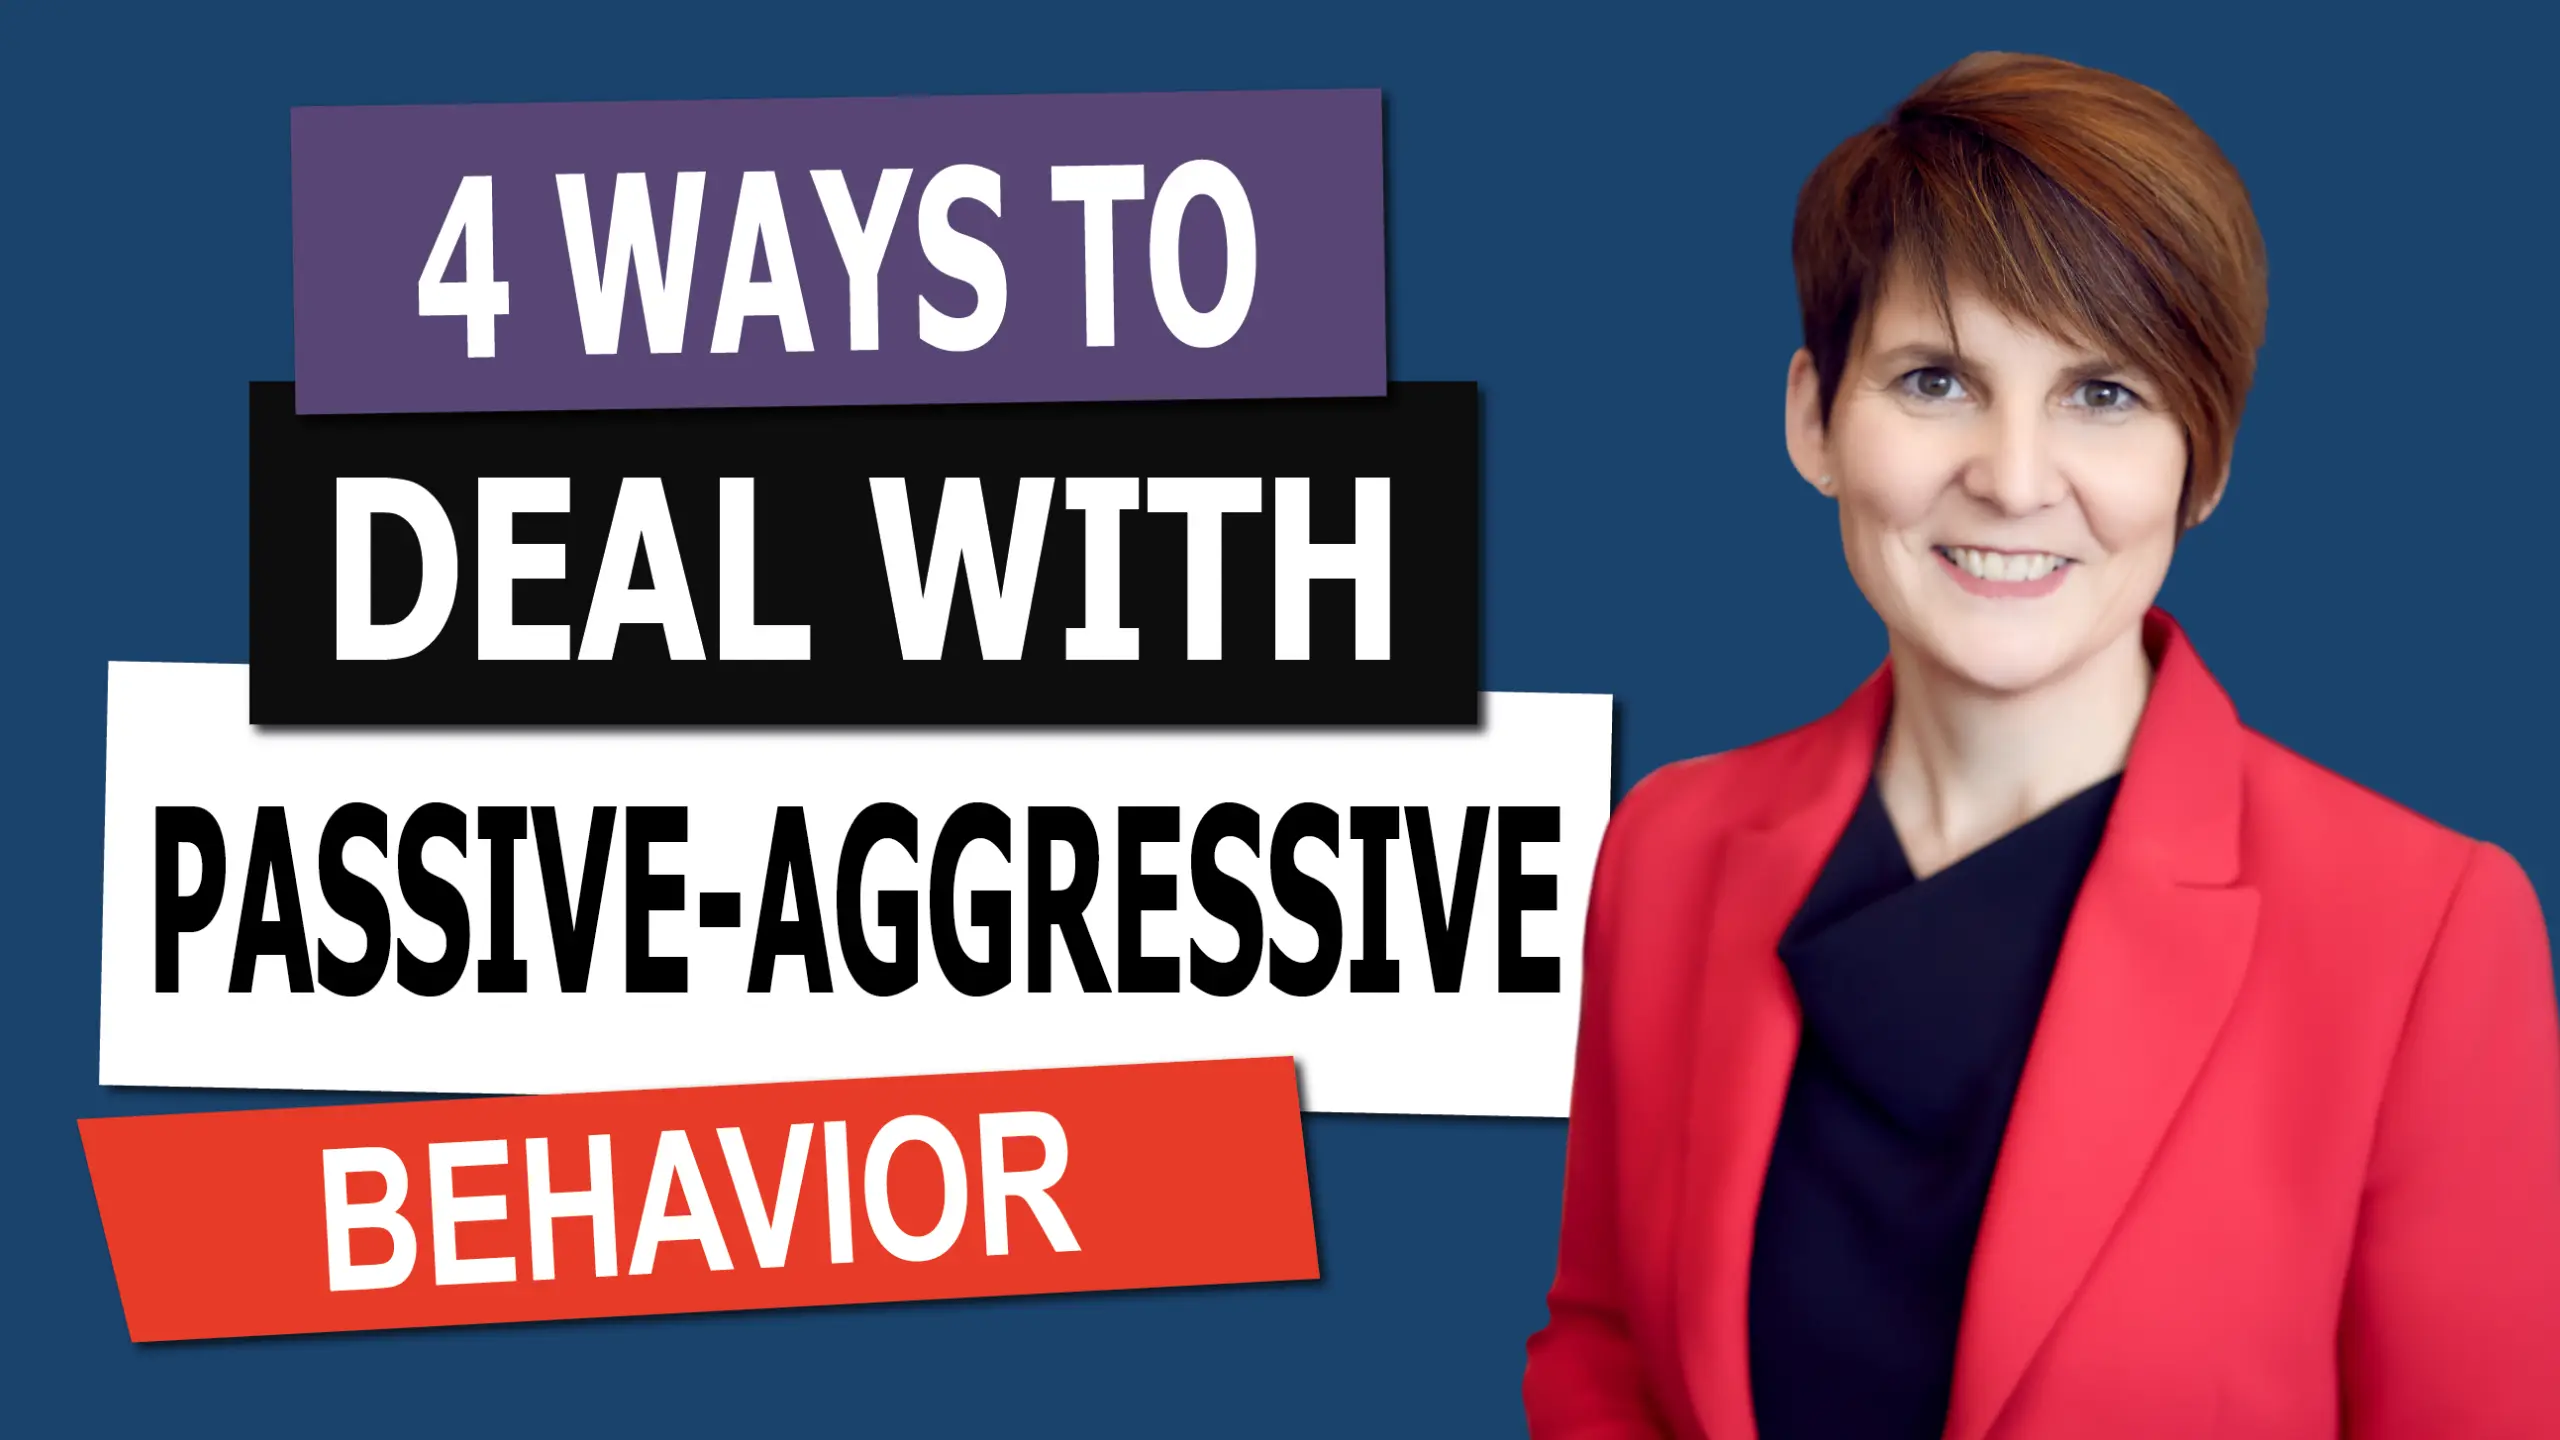 4 Ways to Deal With Passive-Aggressive Behavior with Liane Davey